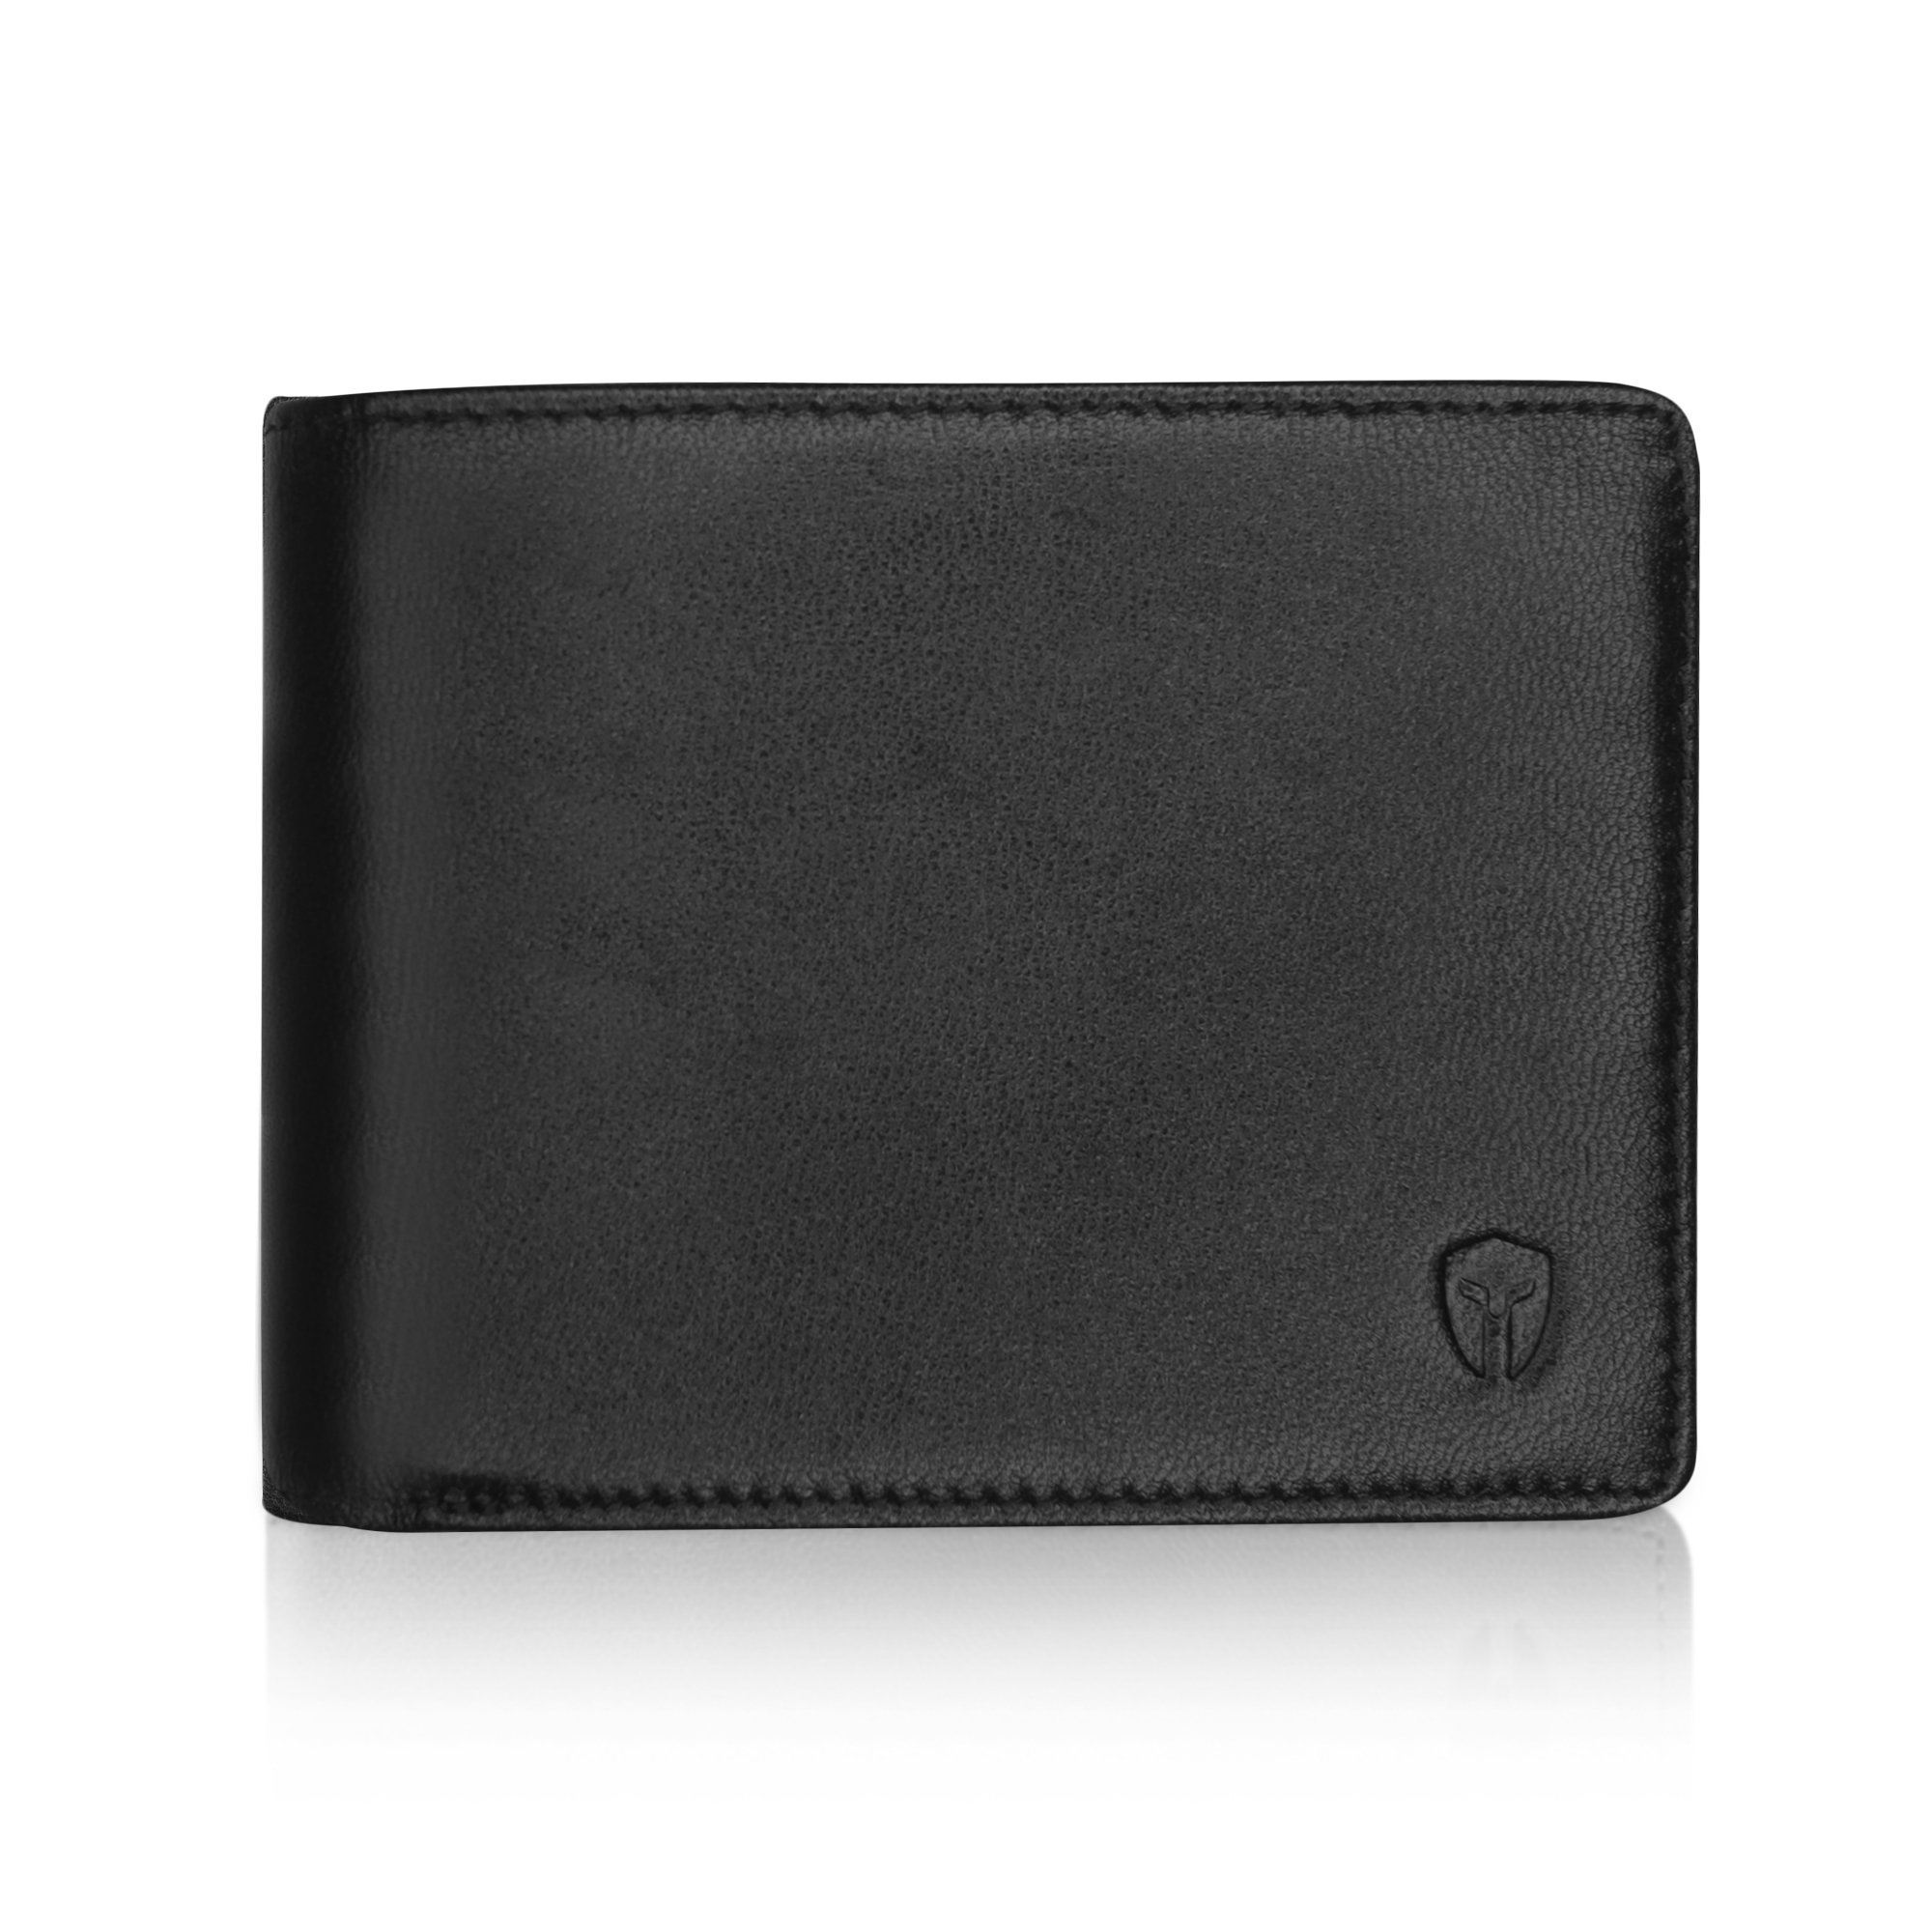 Bryker Hyde 2 ID Window RFID Wallet for Men, Full Grain Leather, Bifold Side Flip, Executive Extra Capacity Travel Wallet (Black - Smooth Napa Grade A Leather)